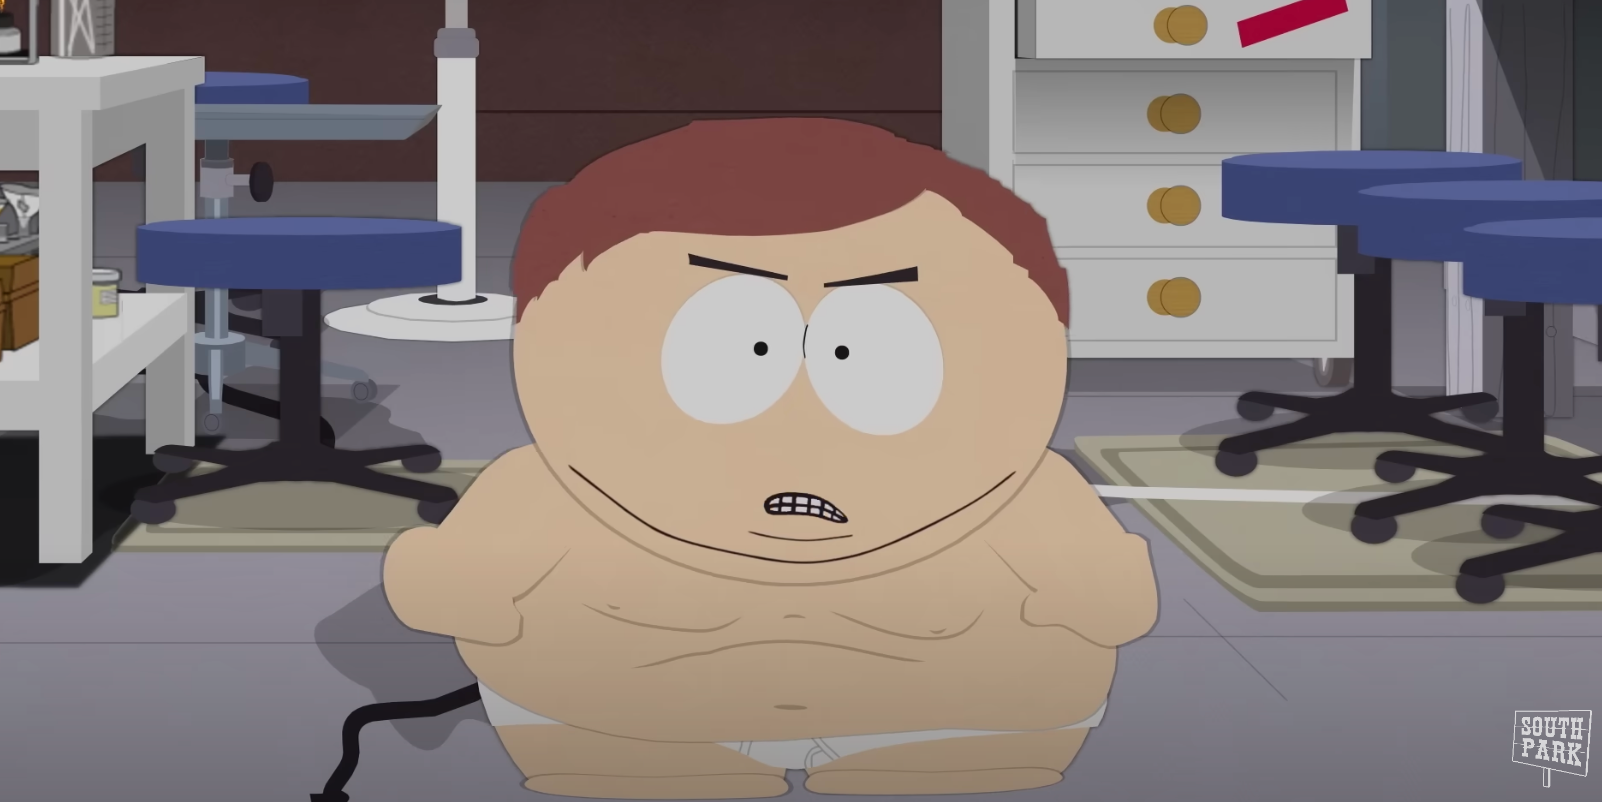 South Park’s Eric Cartman in the weight loss lab